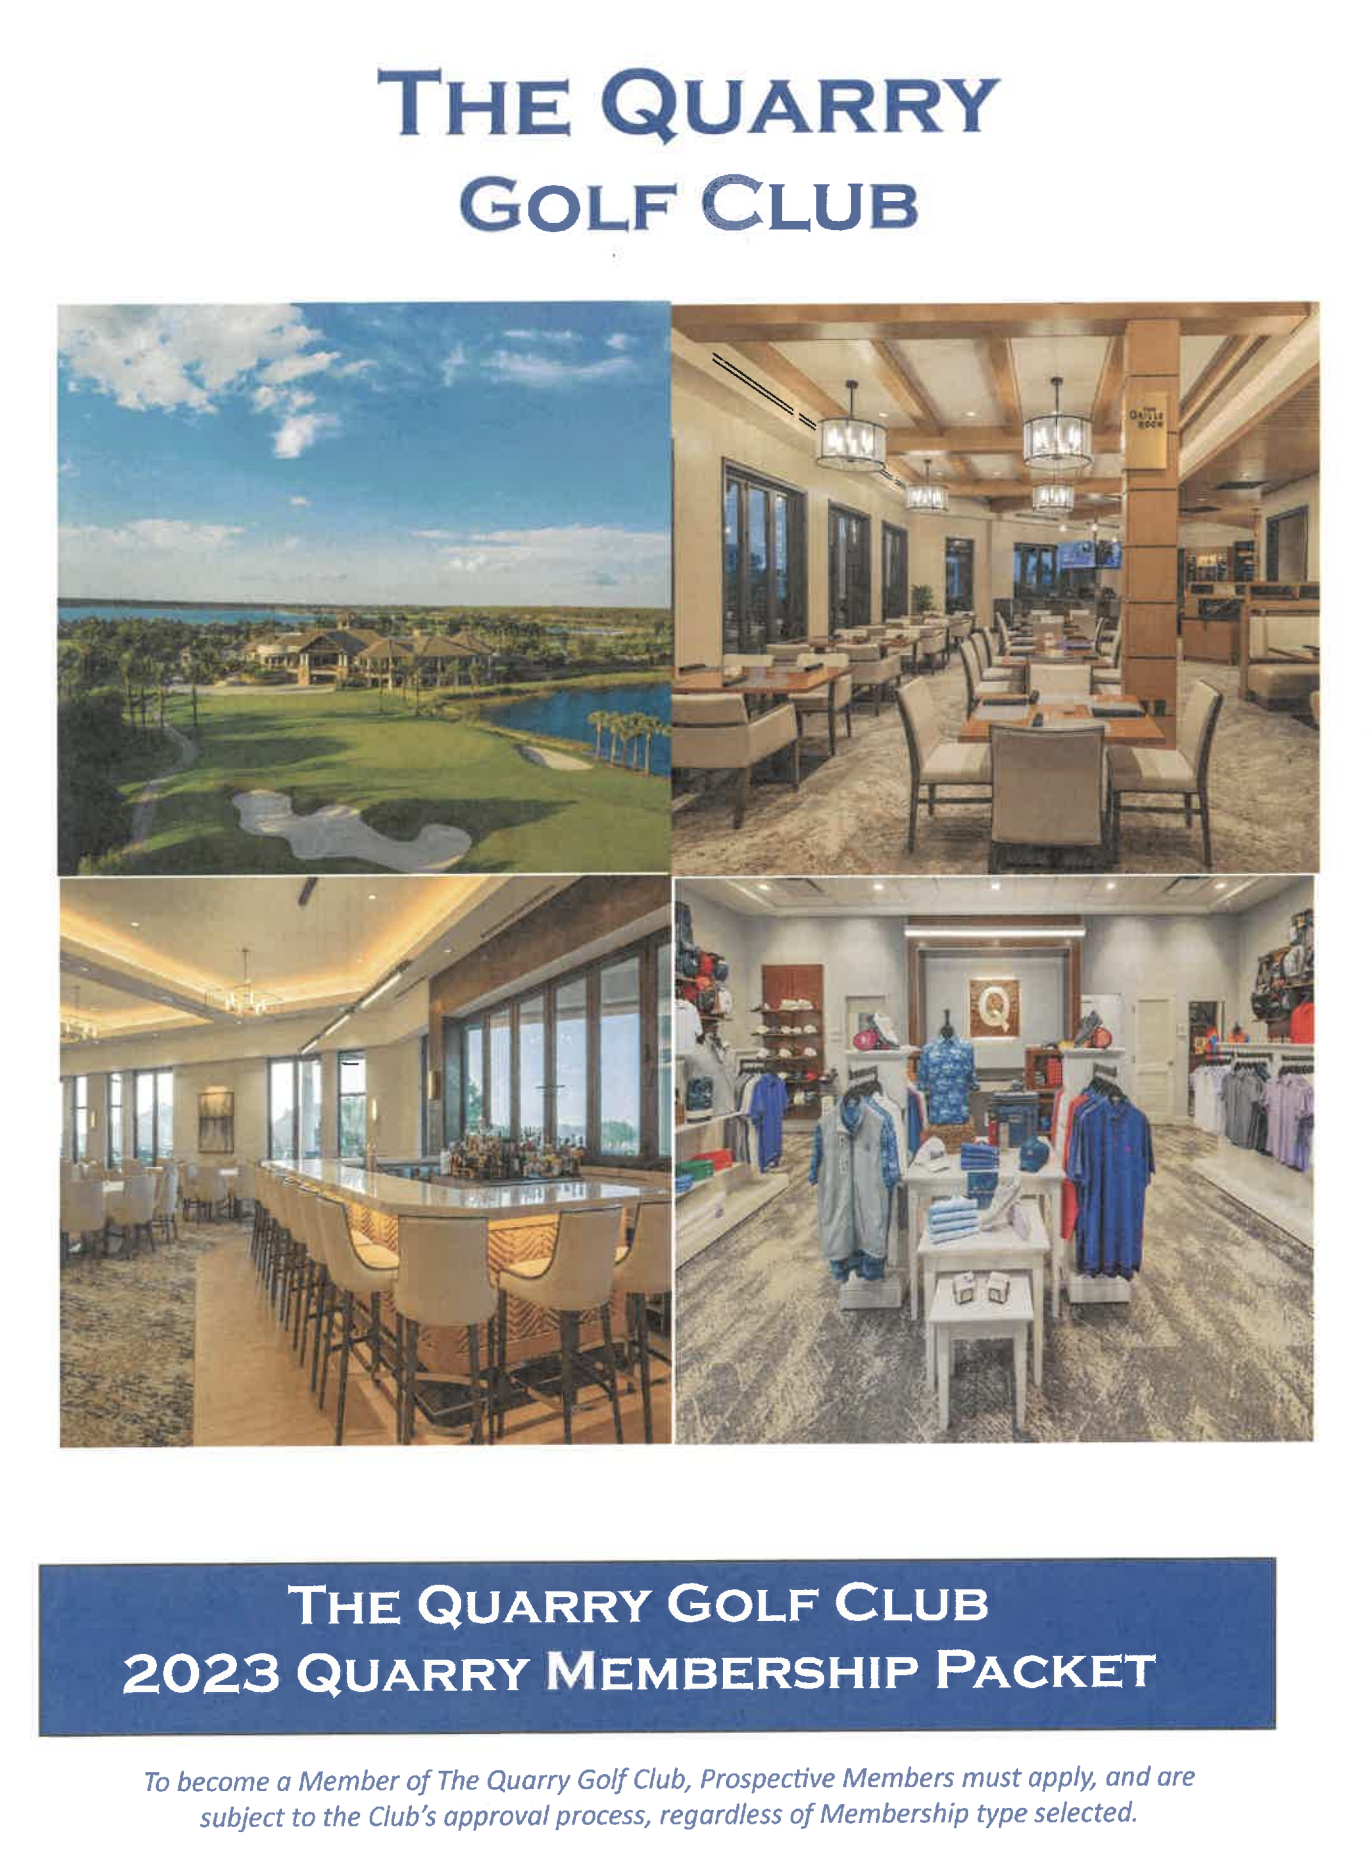 The Quarry Golf Club in Naples, Florida is the premier Private Golf Club in SW Florida.